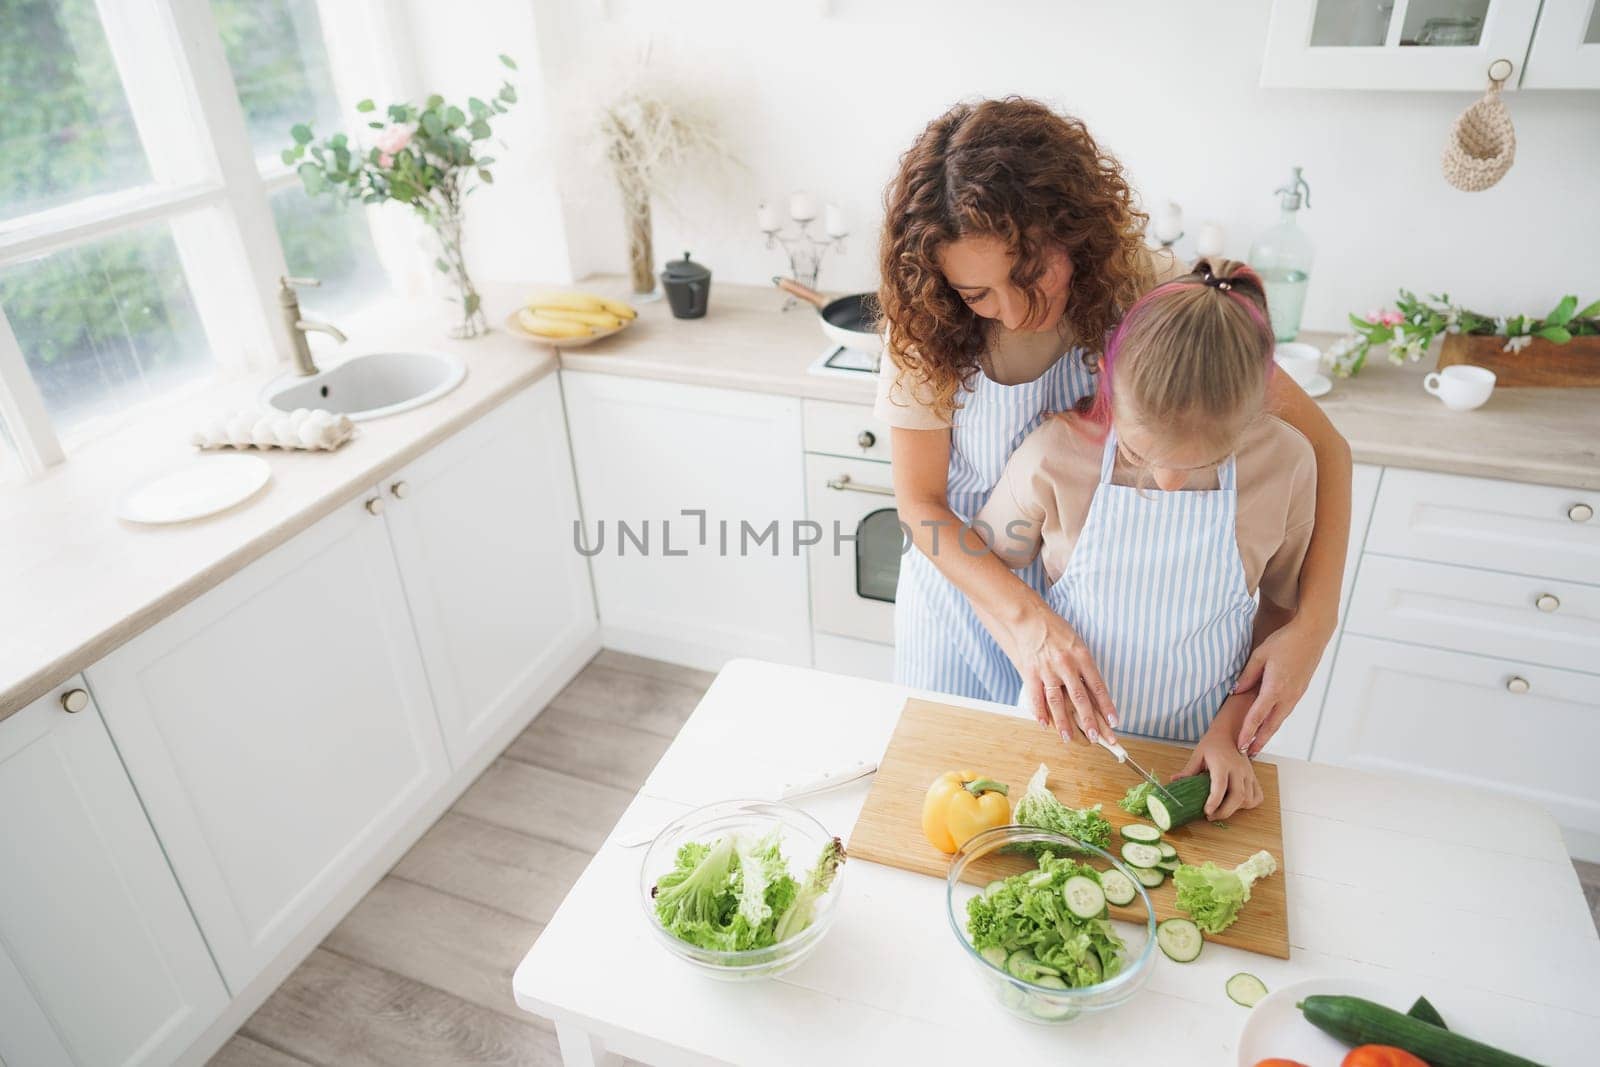 Mommy teaching her teen daughter to cook vegetable salad in kitchen by Fabrikasimf